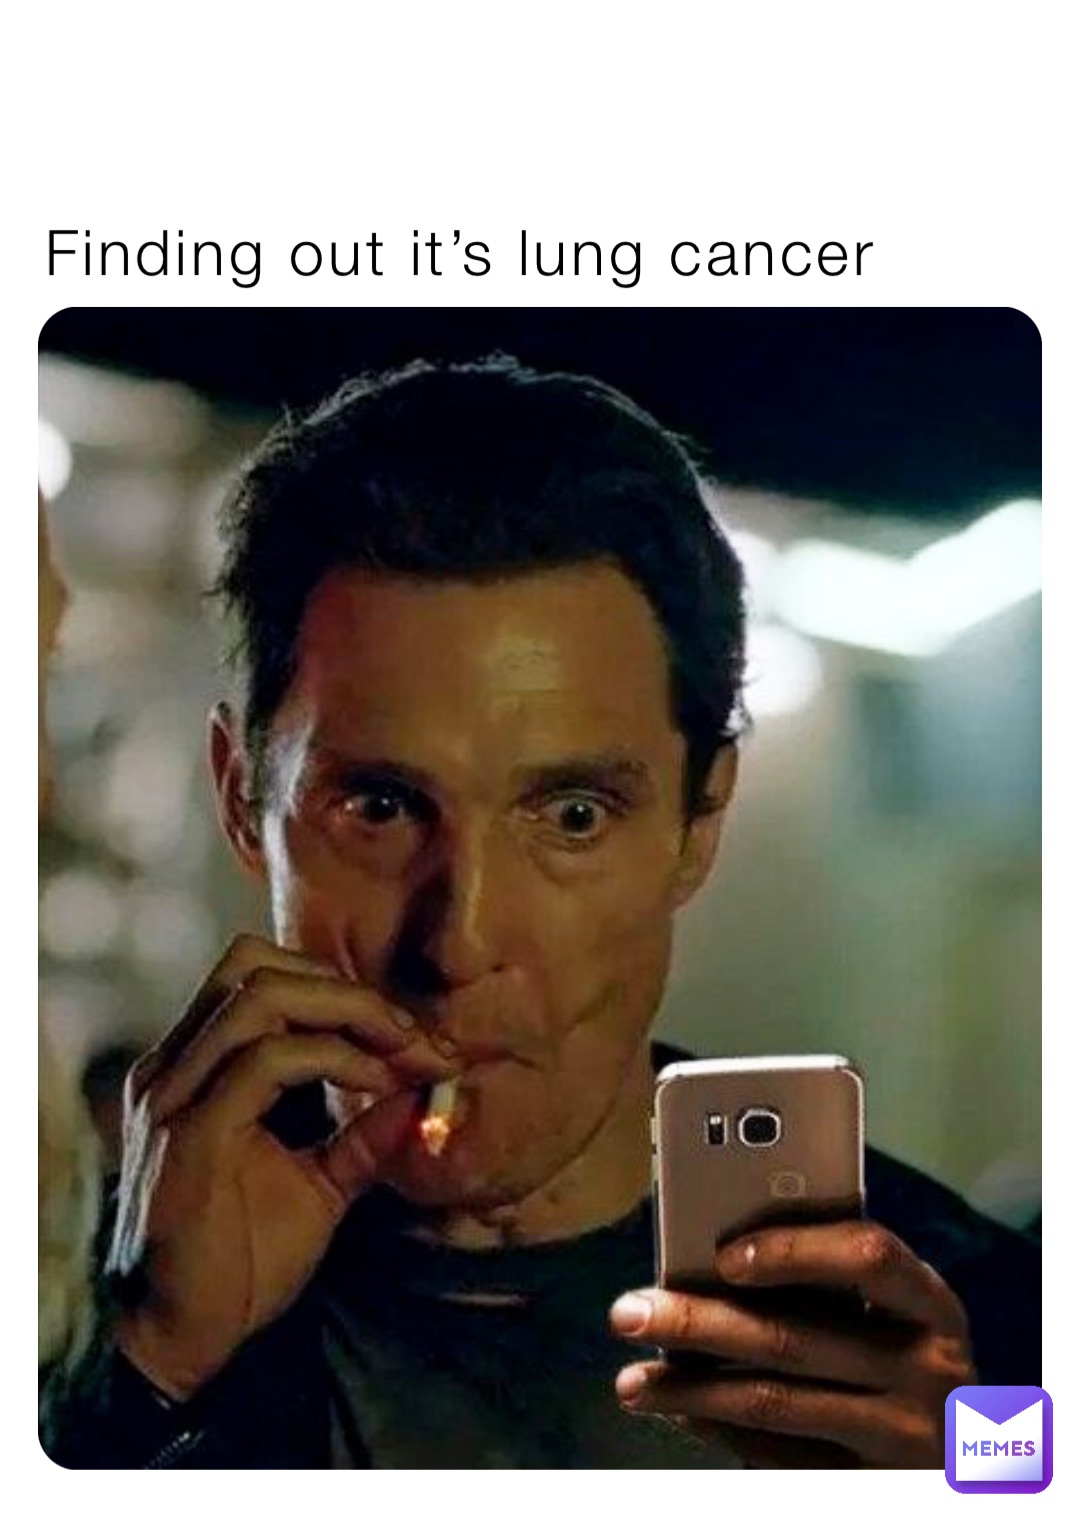 Finding out it’s lung cancer